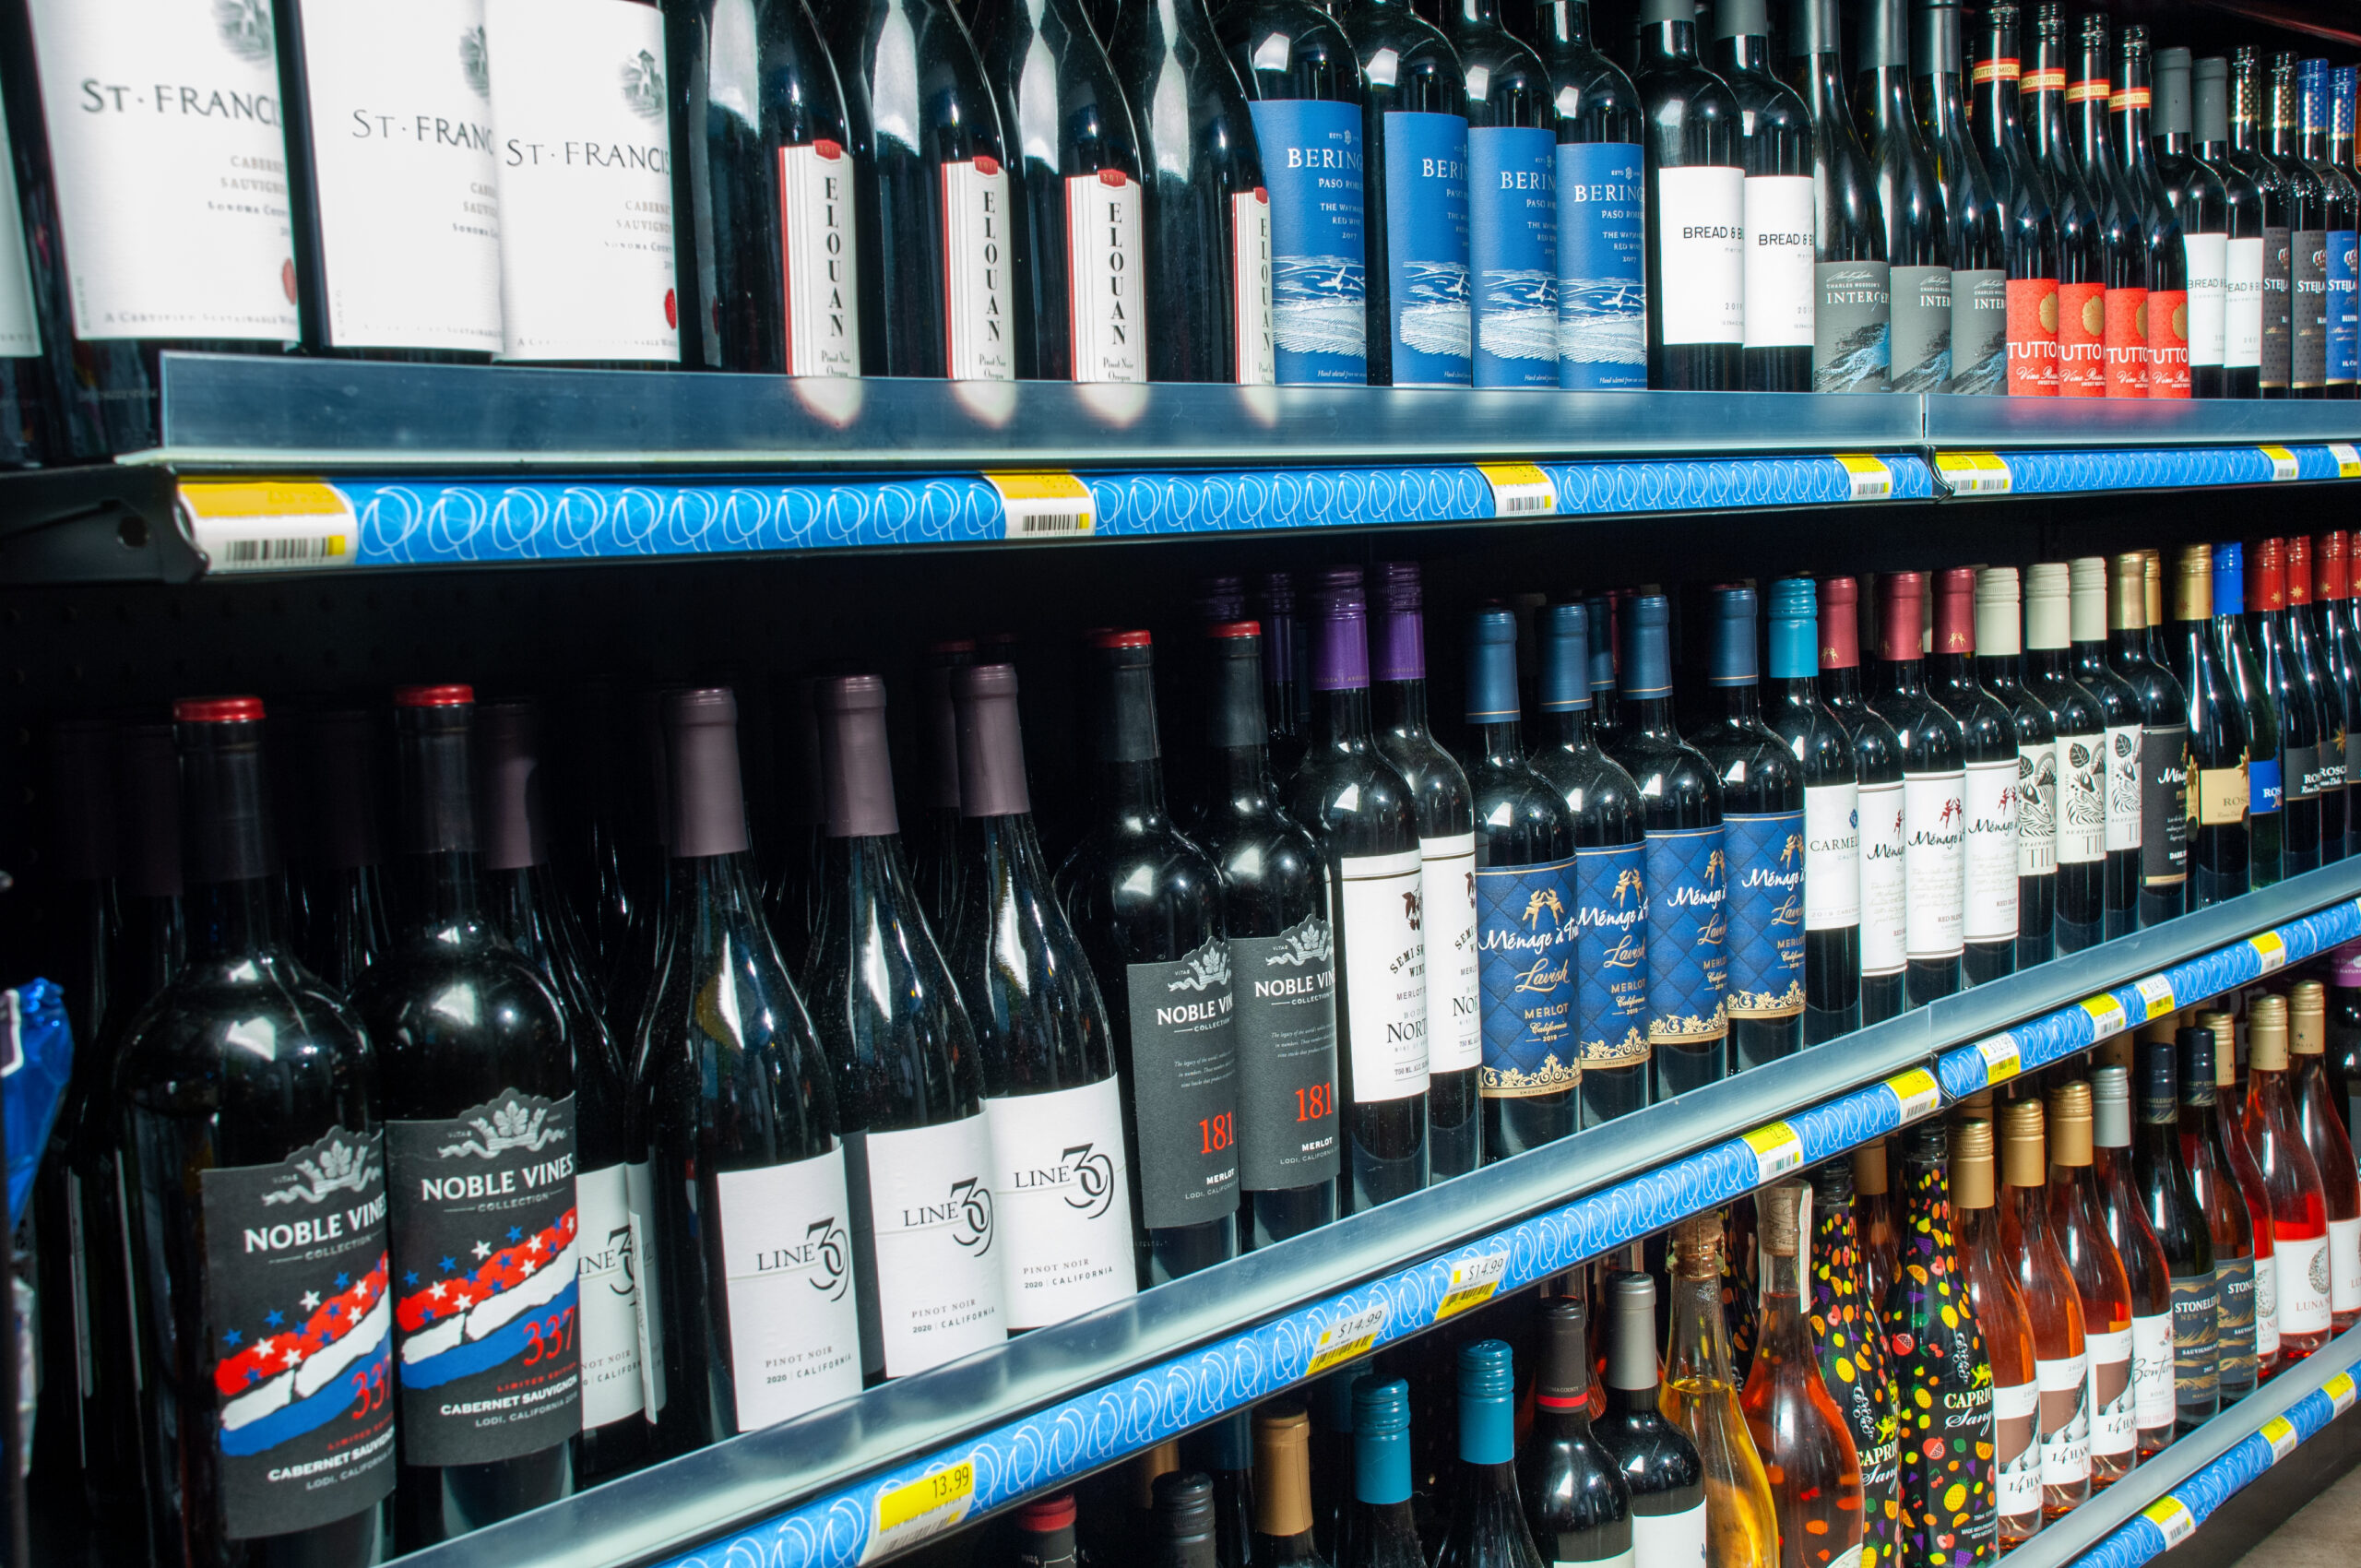 QMart wide selection of wines.